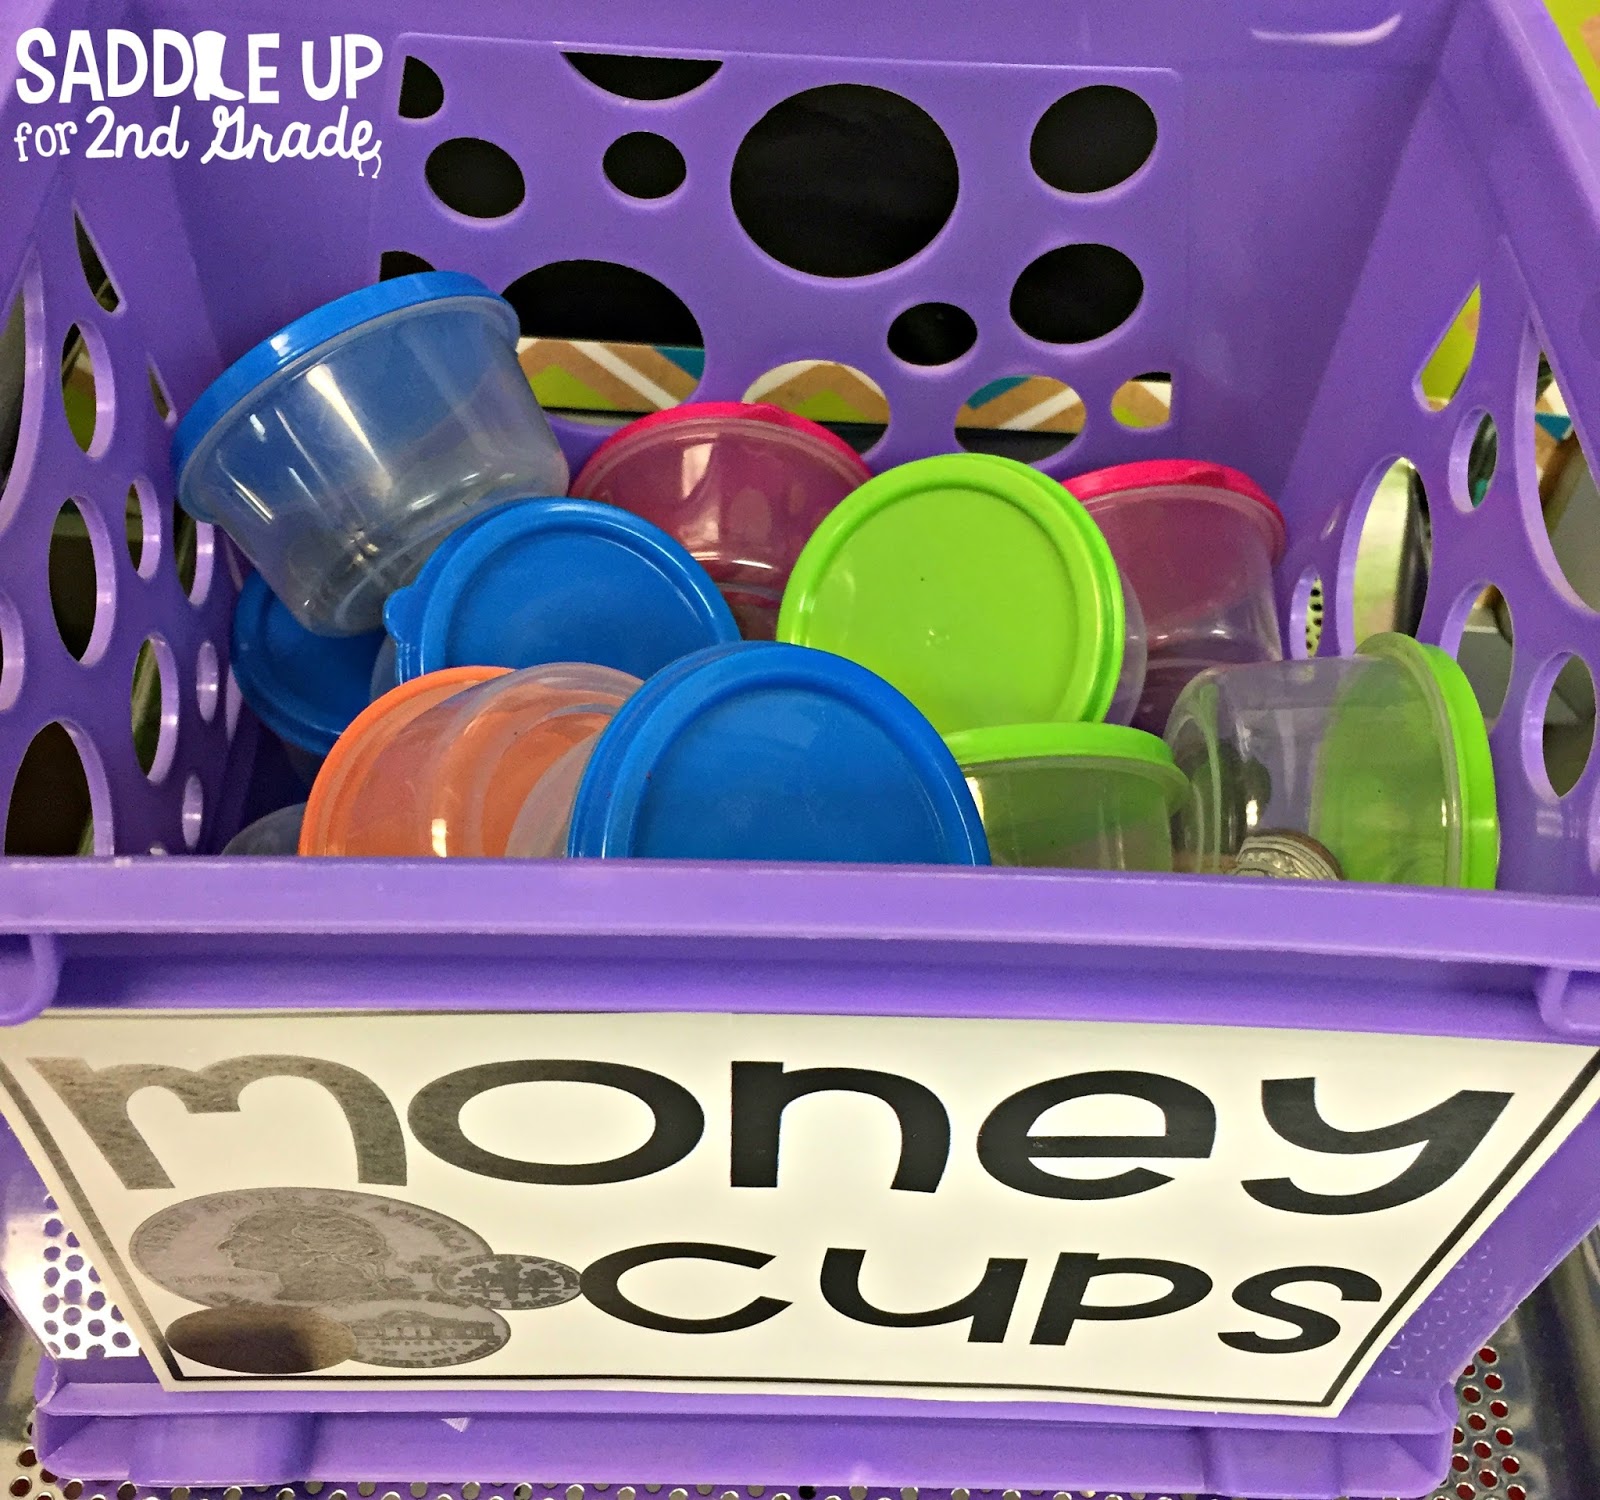 Are you looking for some hands on ways to introduce and reinforce money? This post is full of ideas for the primary classroom. It includes several hands on activities and a FREEBIE to use. Come check it out!